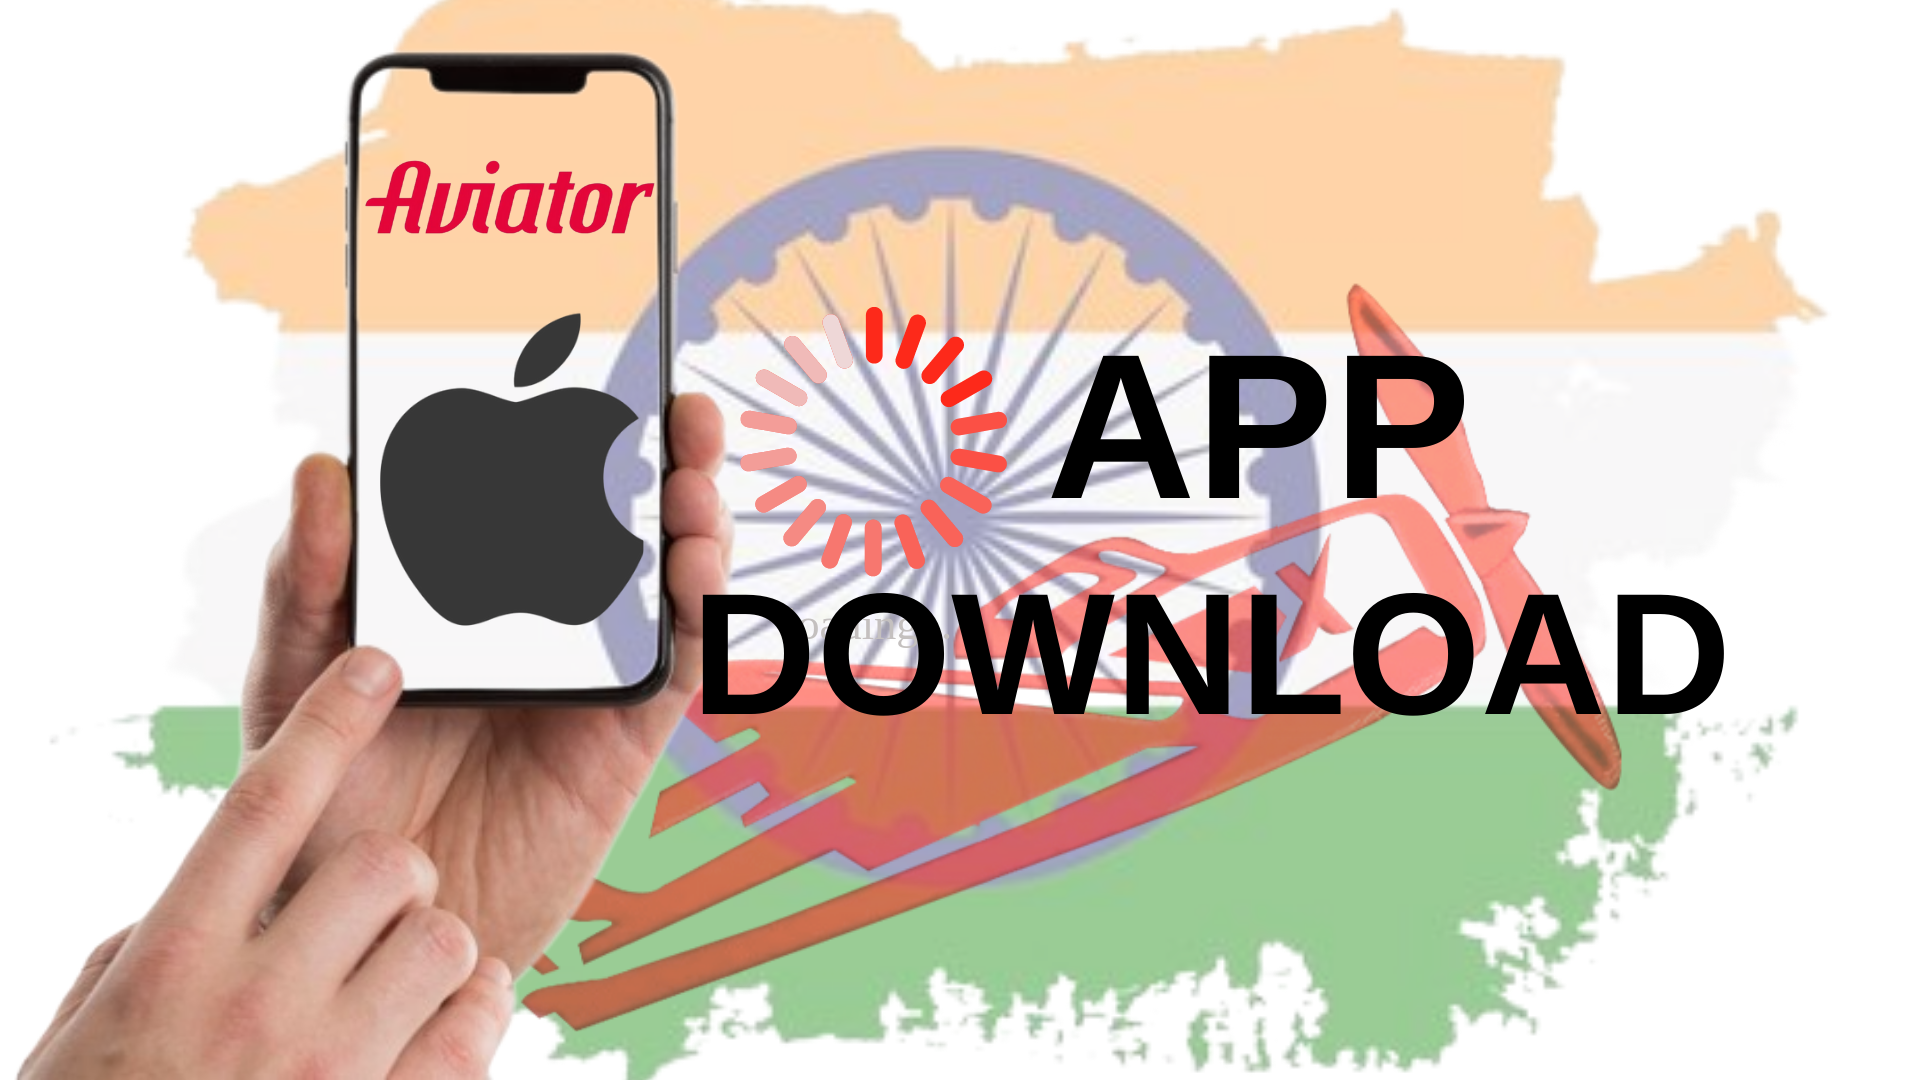 A hand holding an IOS phone with text 'App download', and Indian flag background